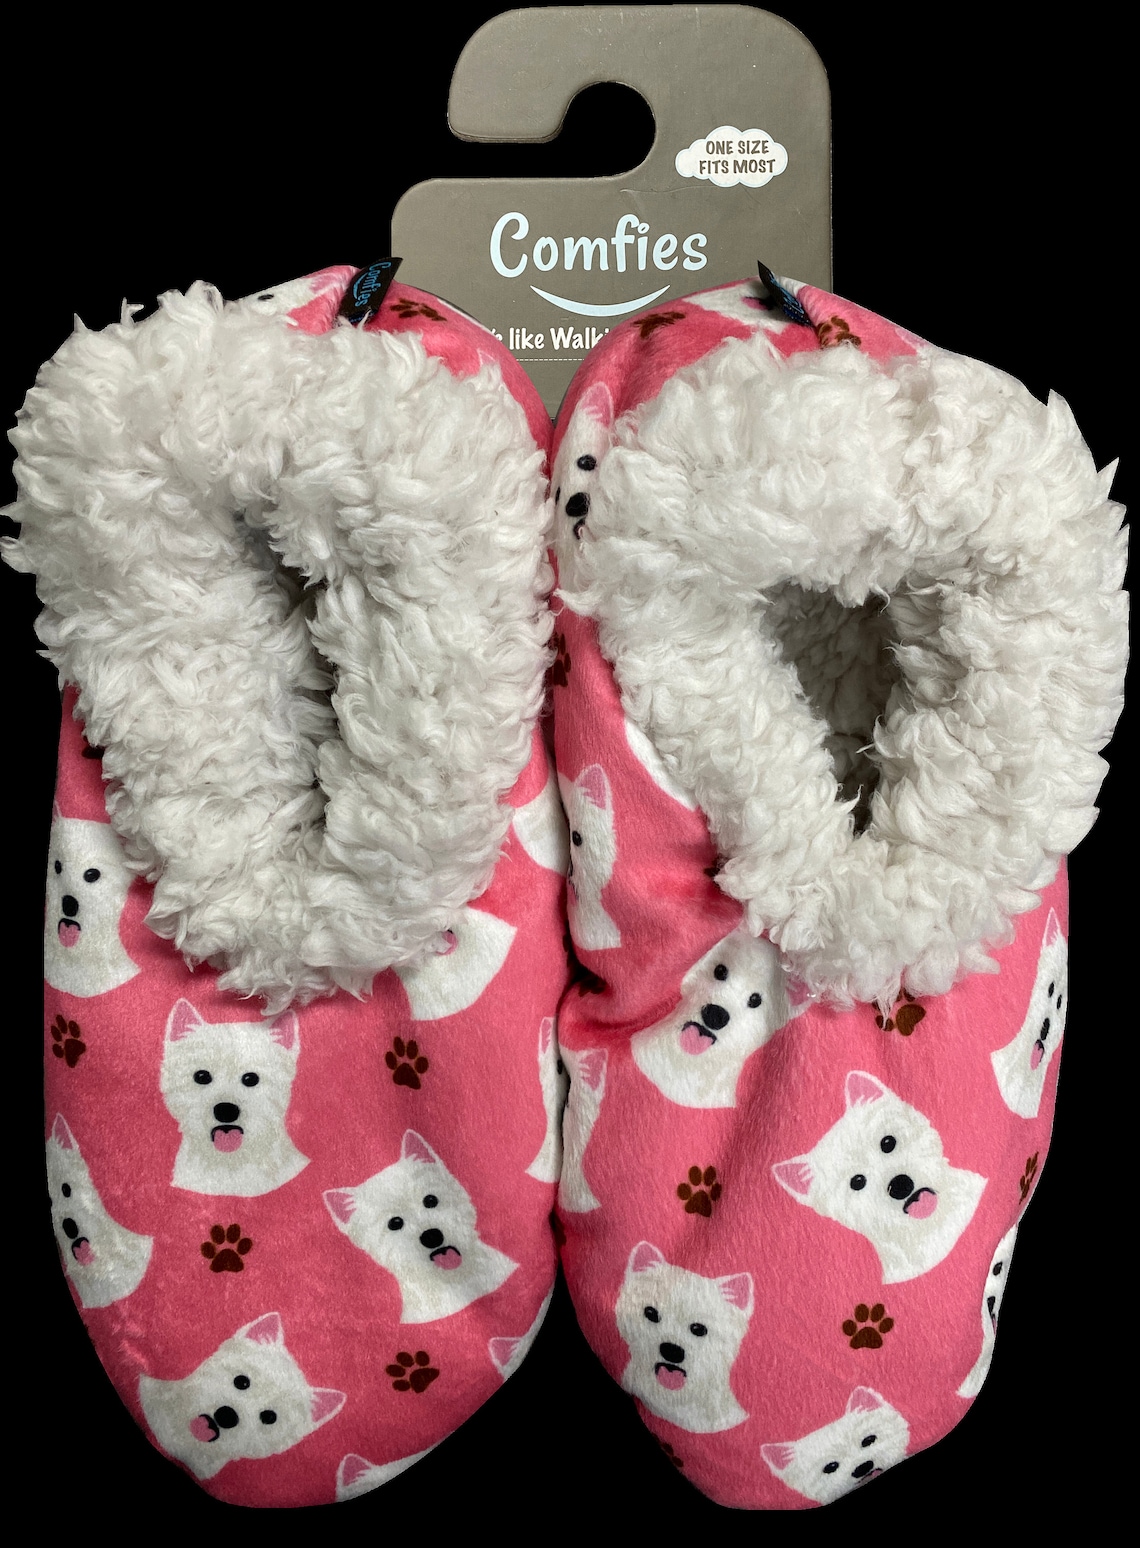 Westie Super Soft Womens Slippers One Size Fits Most Cozy | Etsy